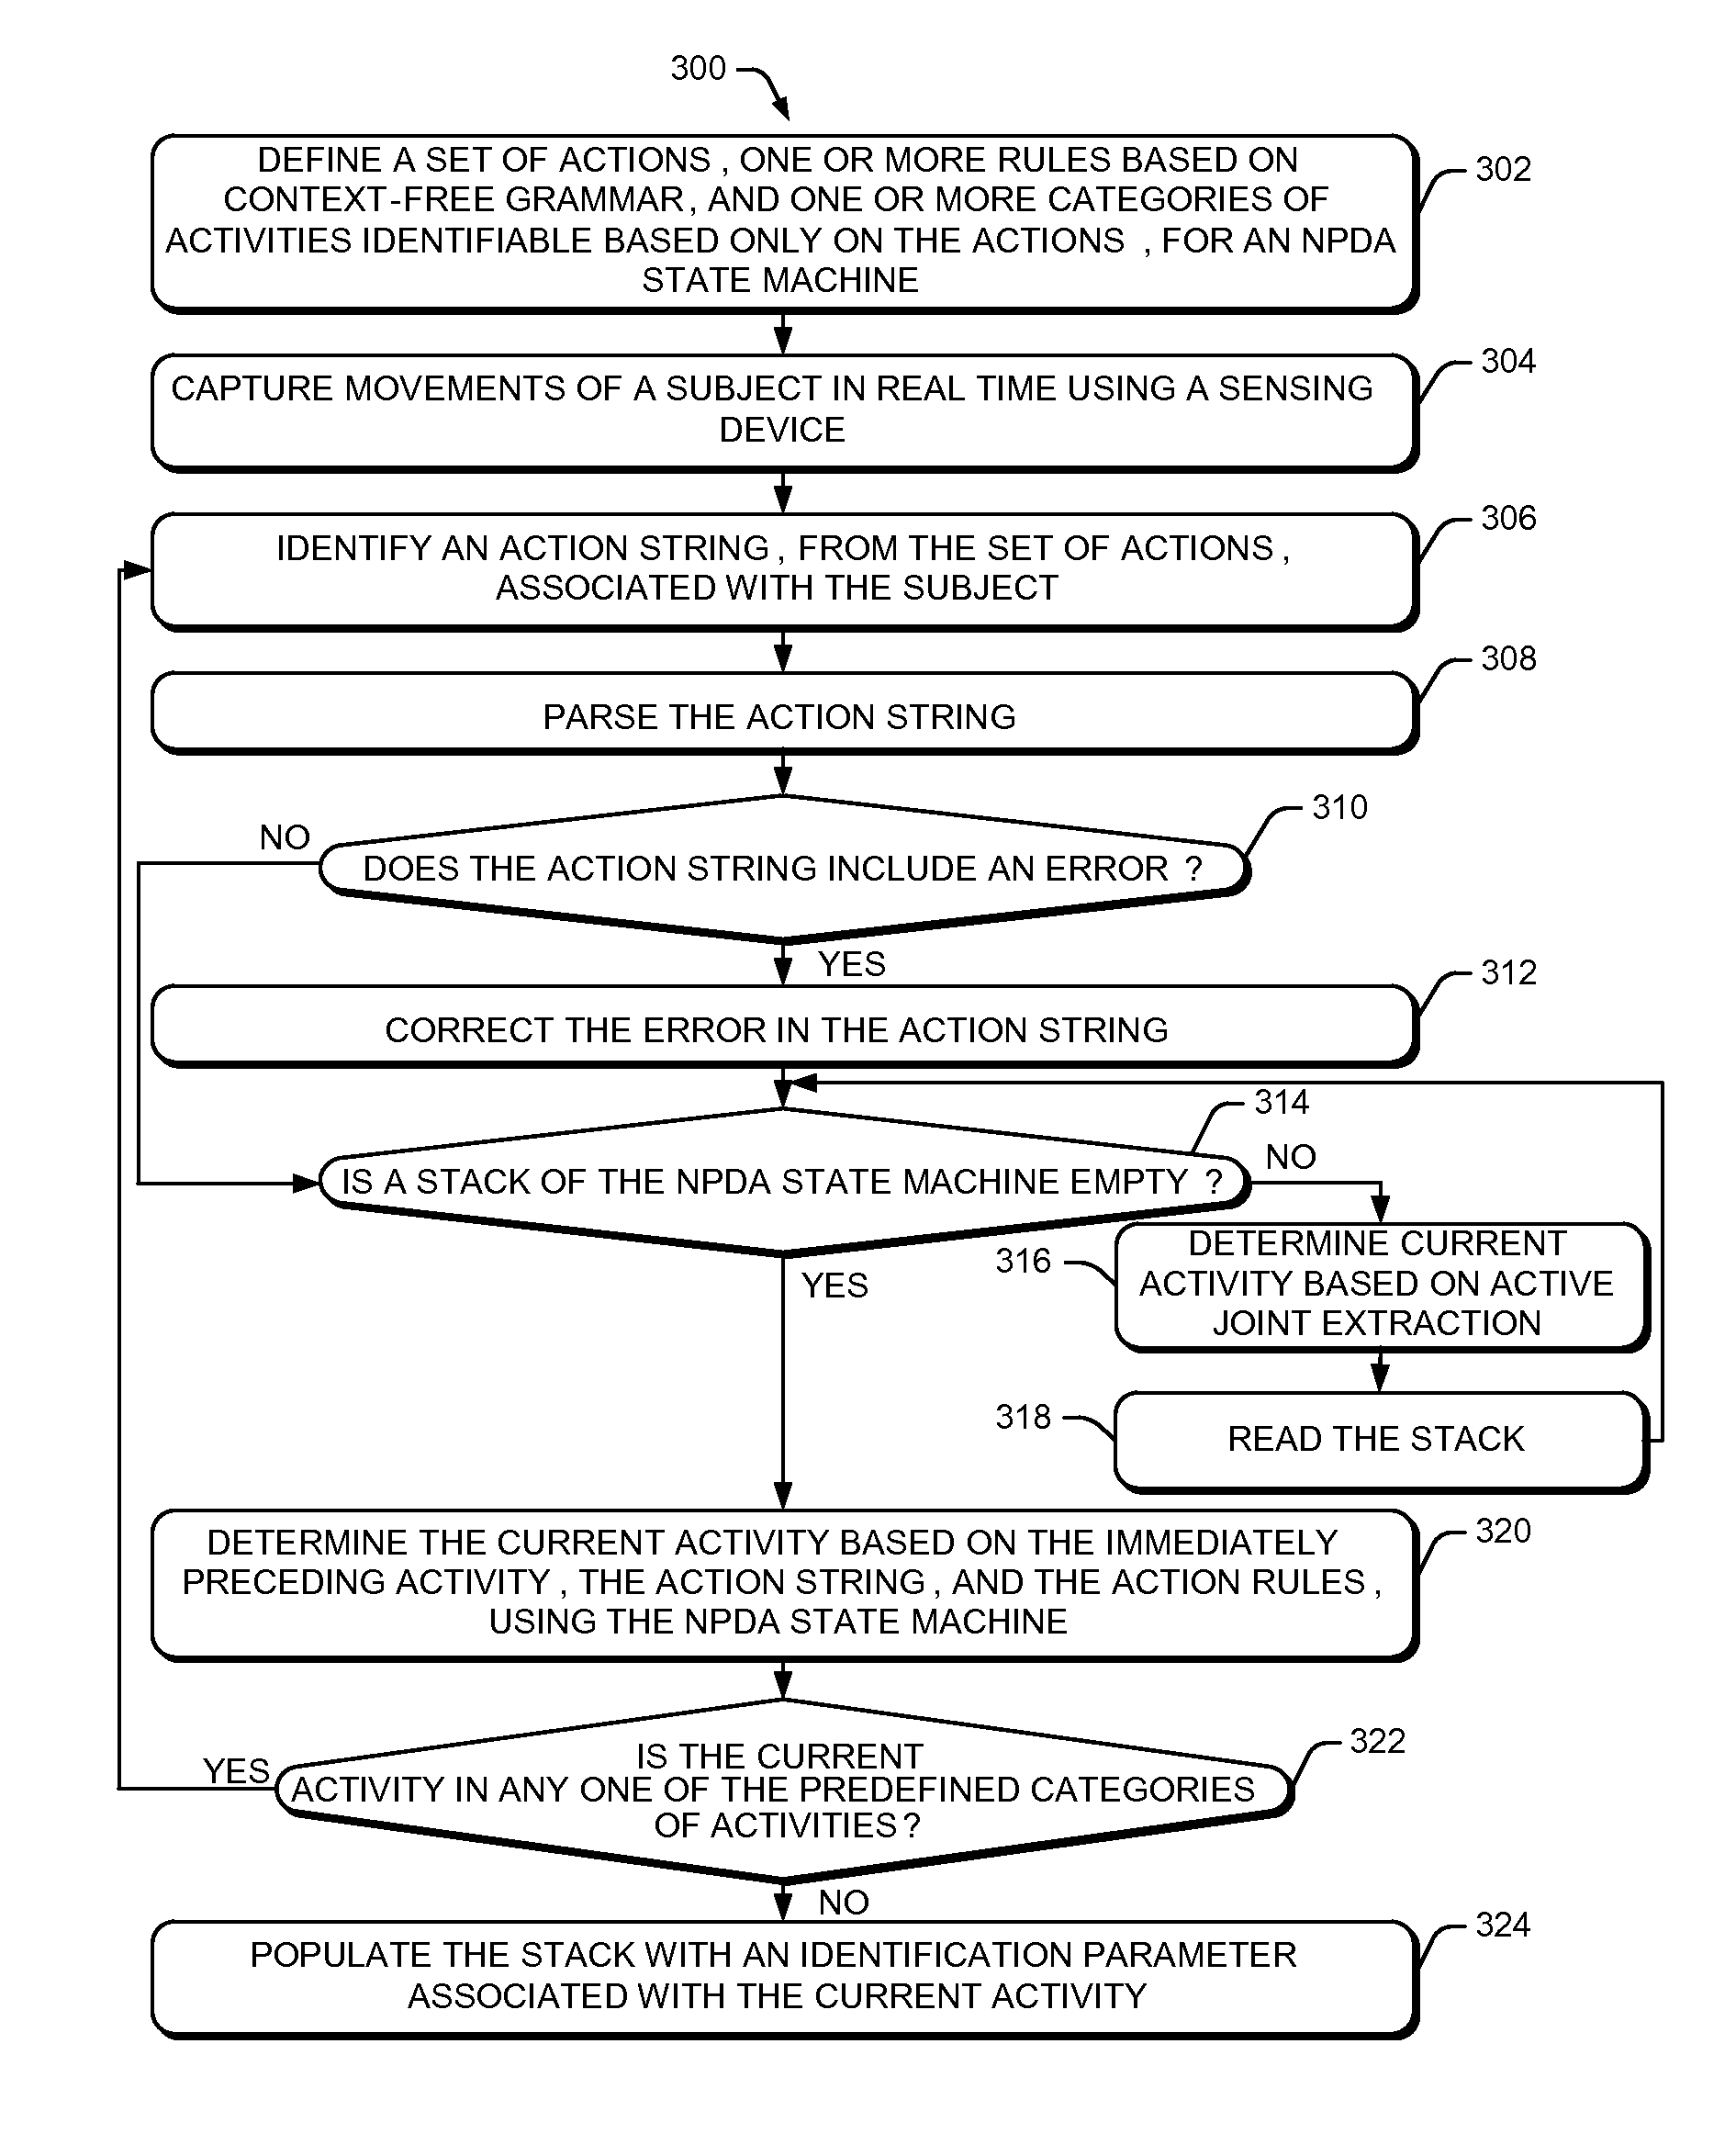 Action based activity determination system and method